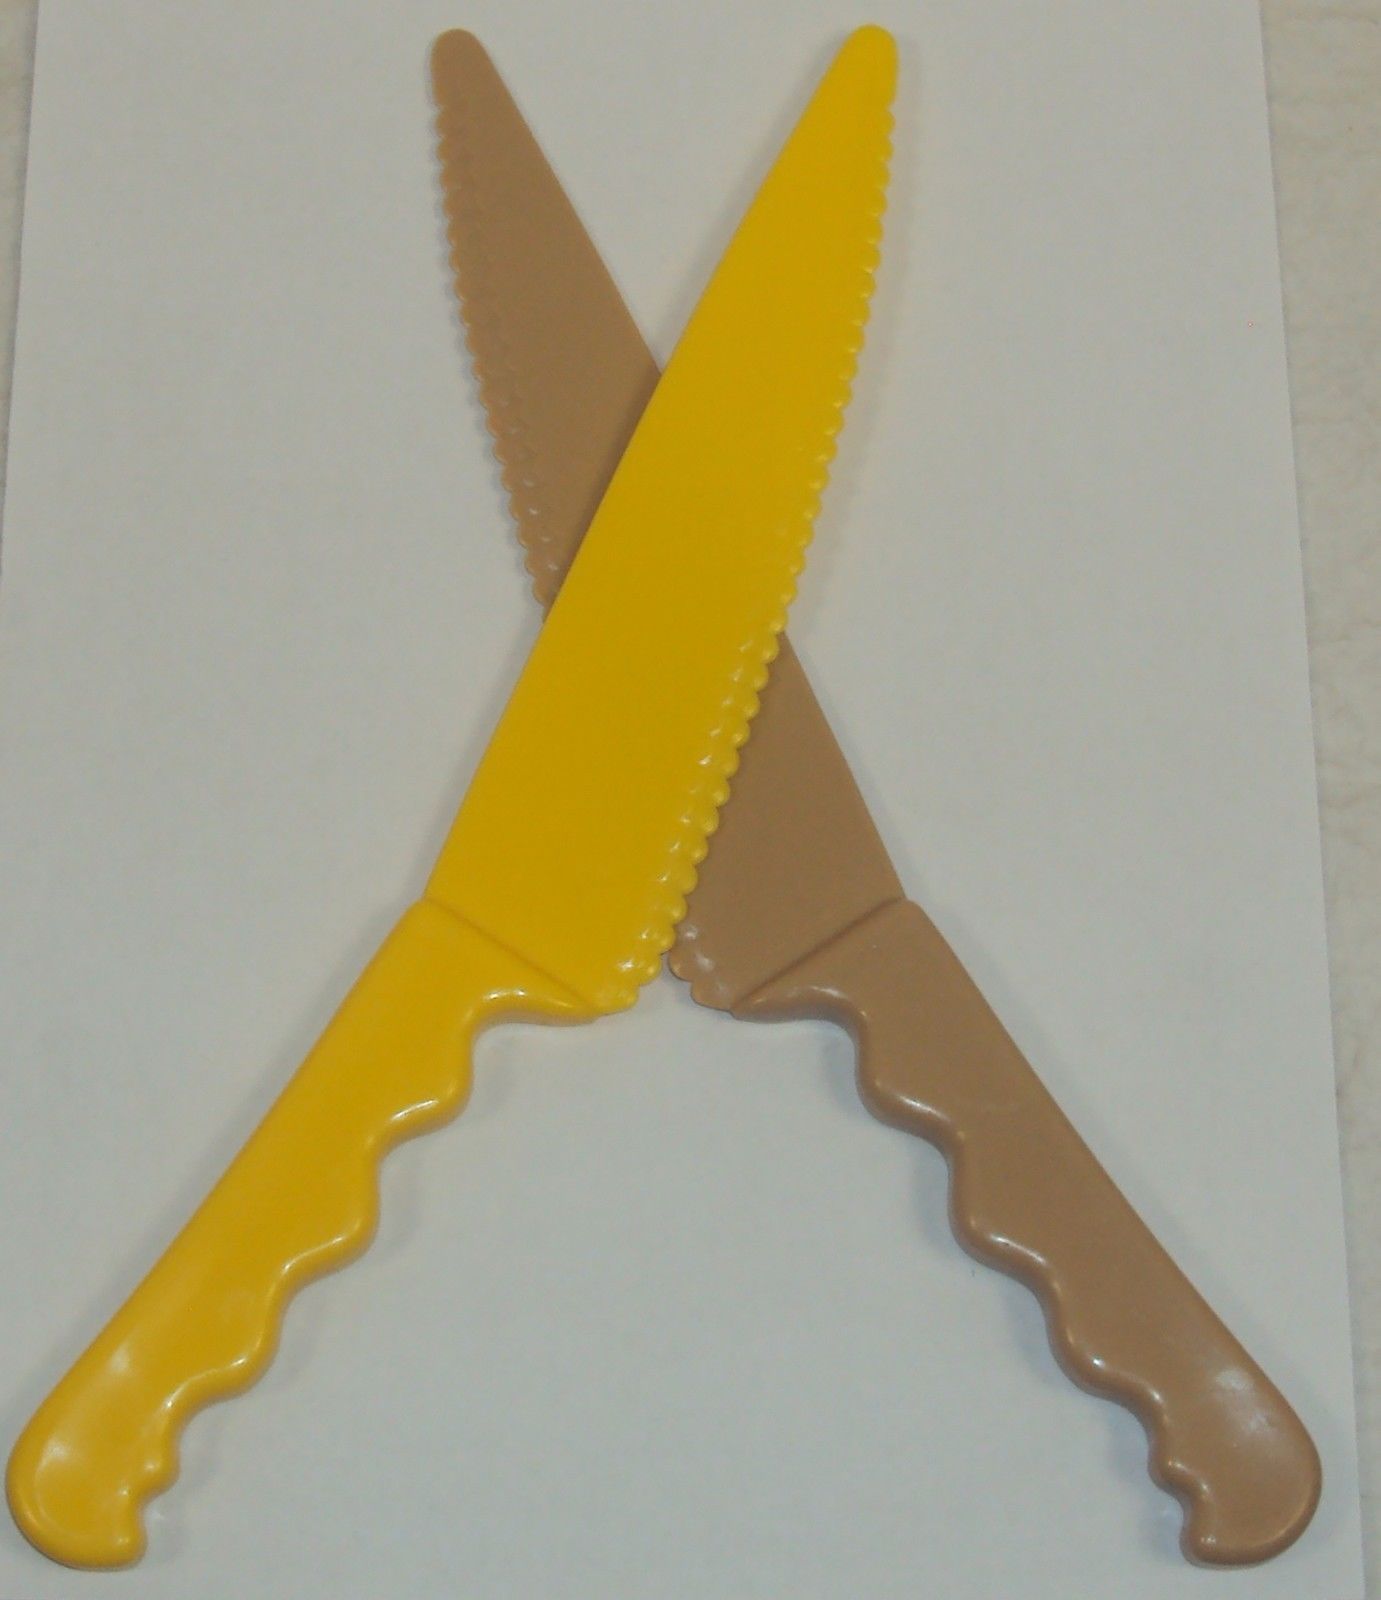 Plastic Serrated Kitchen Knife - Yellow or Brown ~ Cuts Cakes, Veggies, Cheeses - $7.95